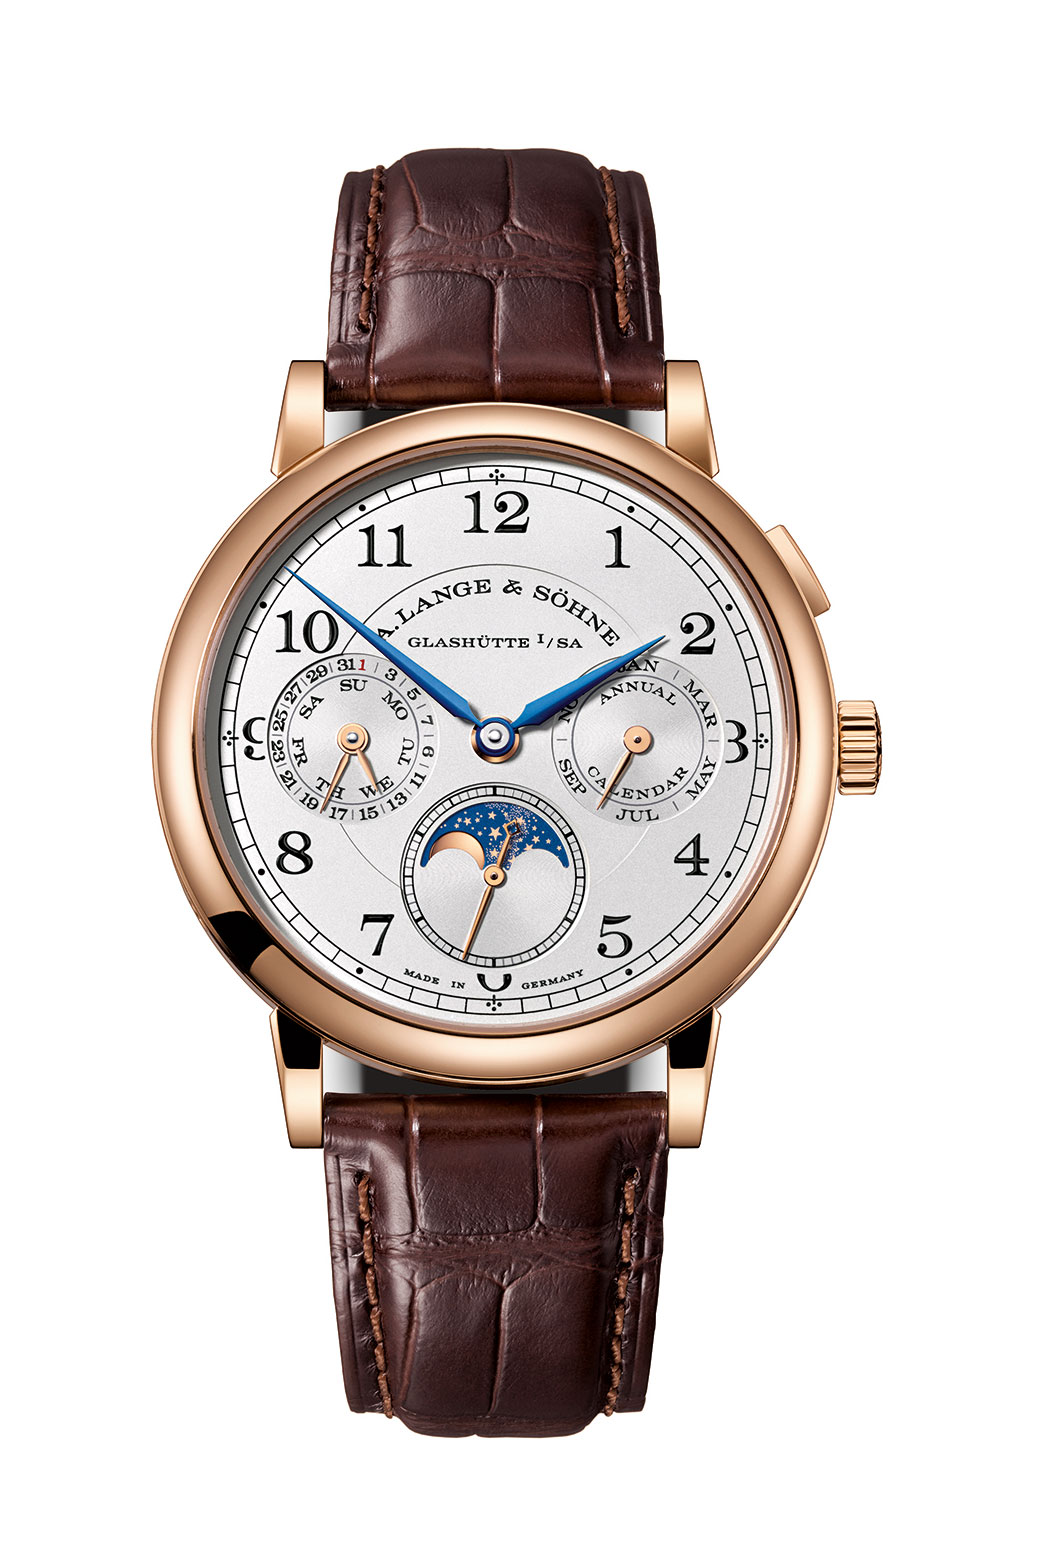 Showing at WatchTime New York 2017: A. Lange & Söhne 1815 Annual Calendar